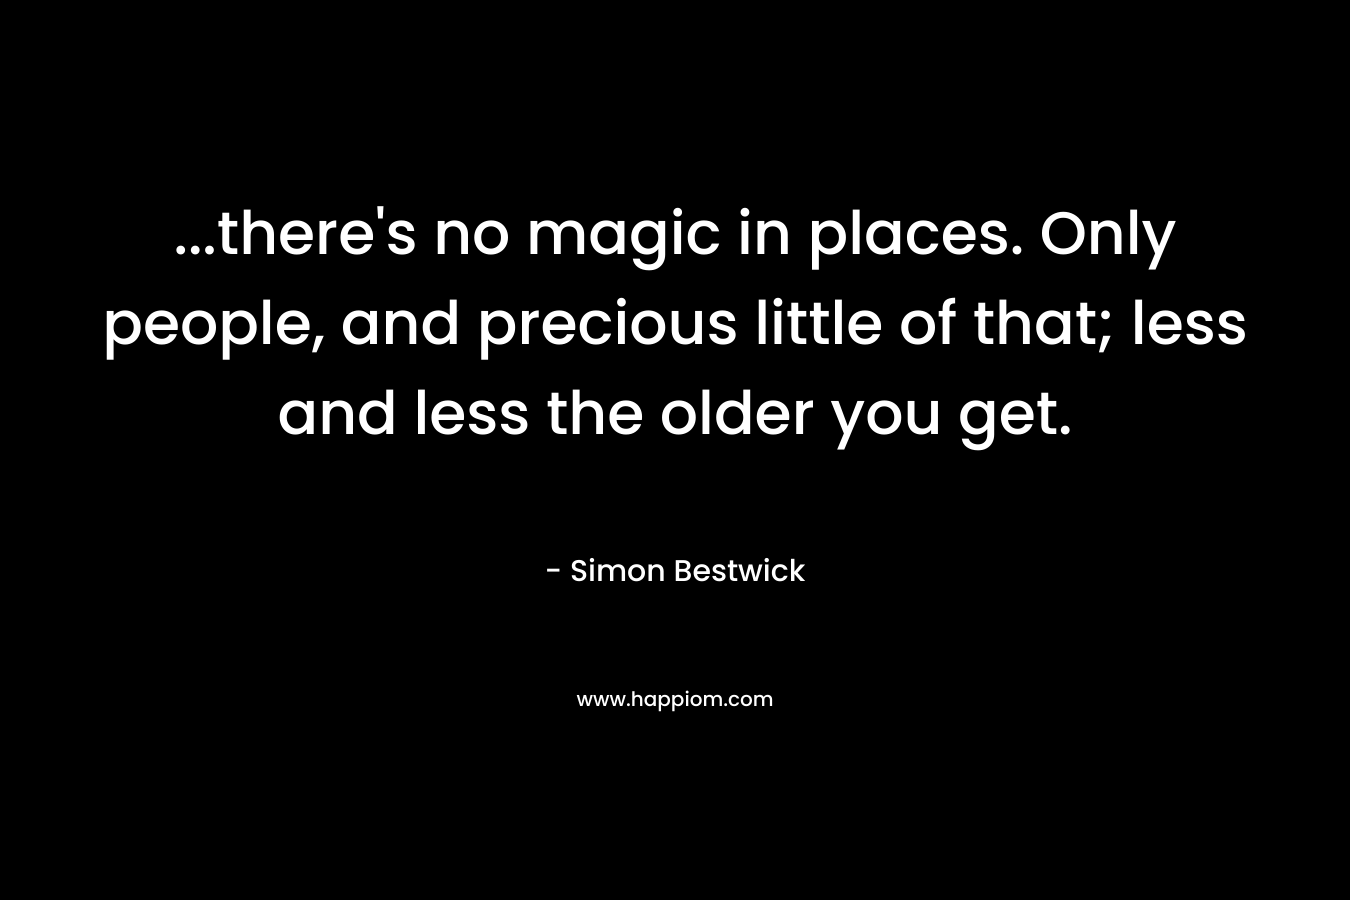 ...there's no magic in places. Only people, and precious little of that; less and less the older you get.